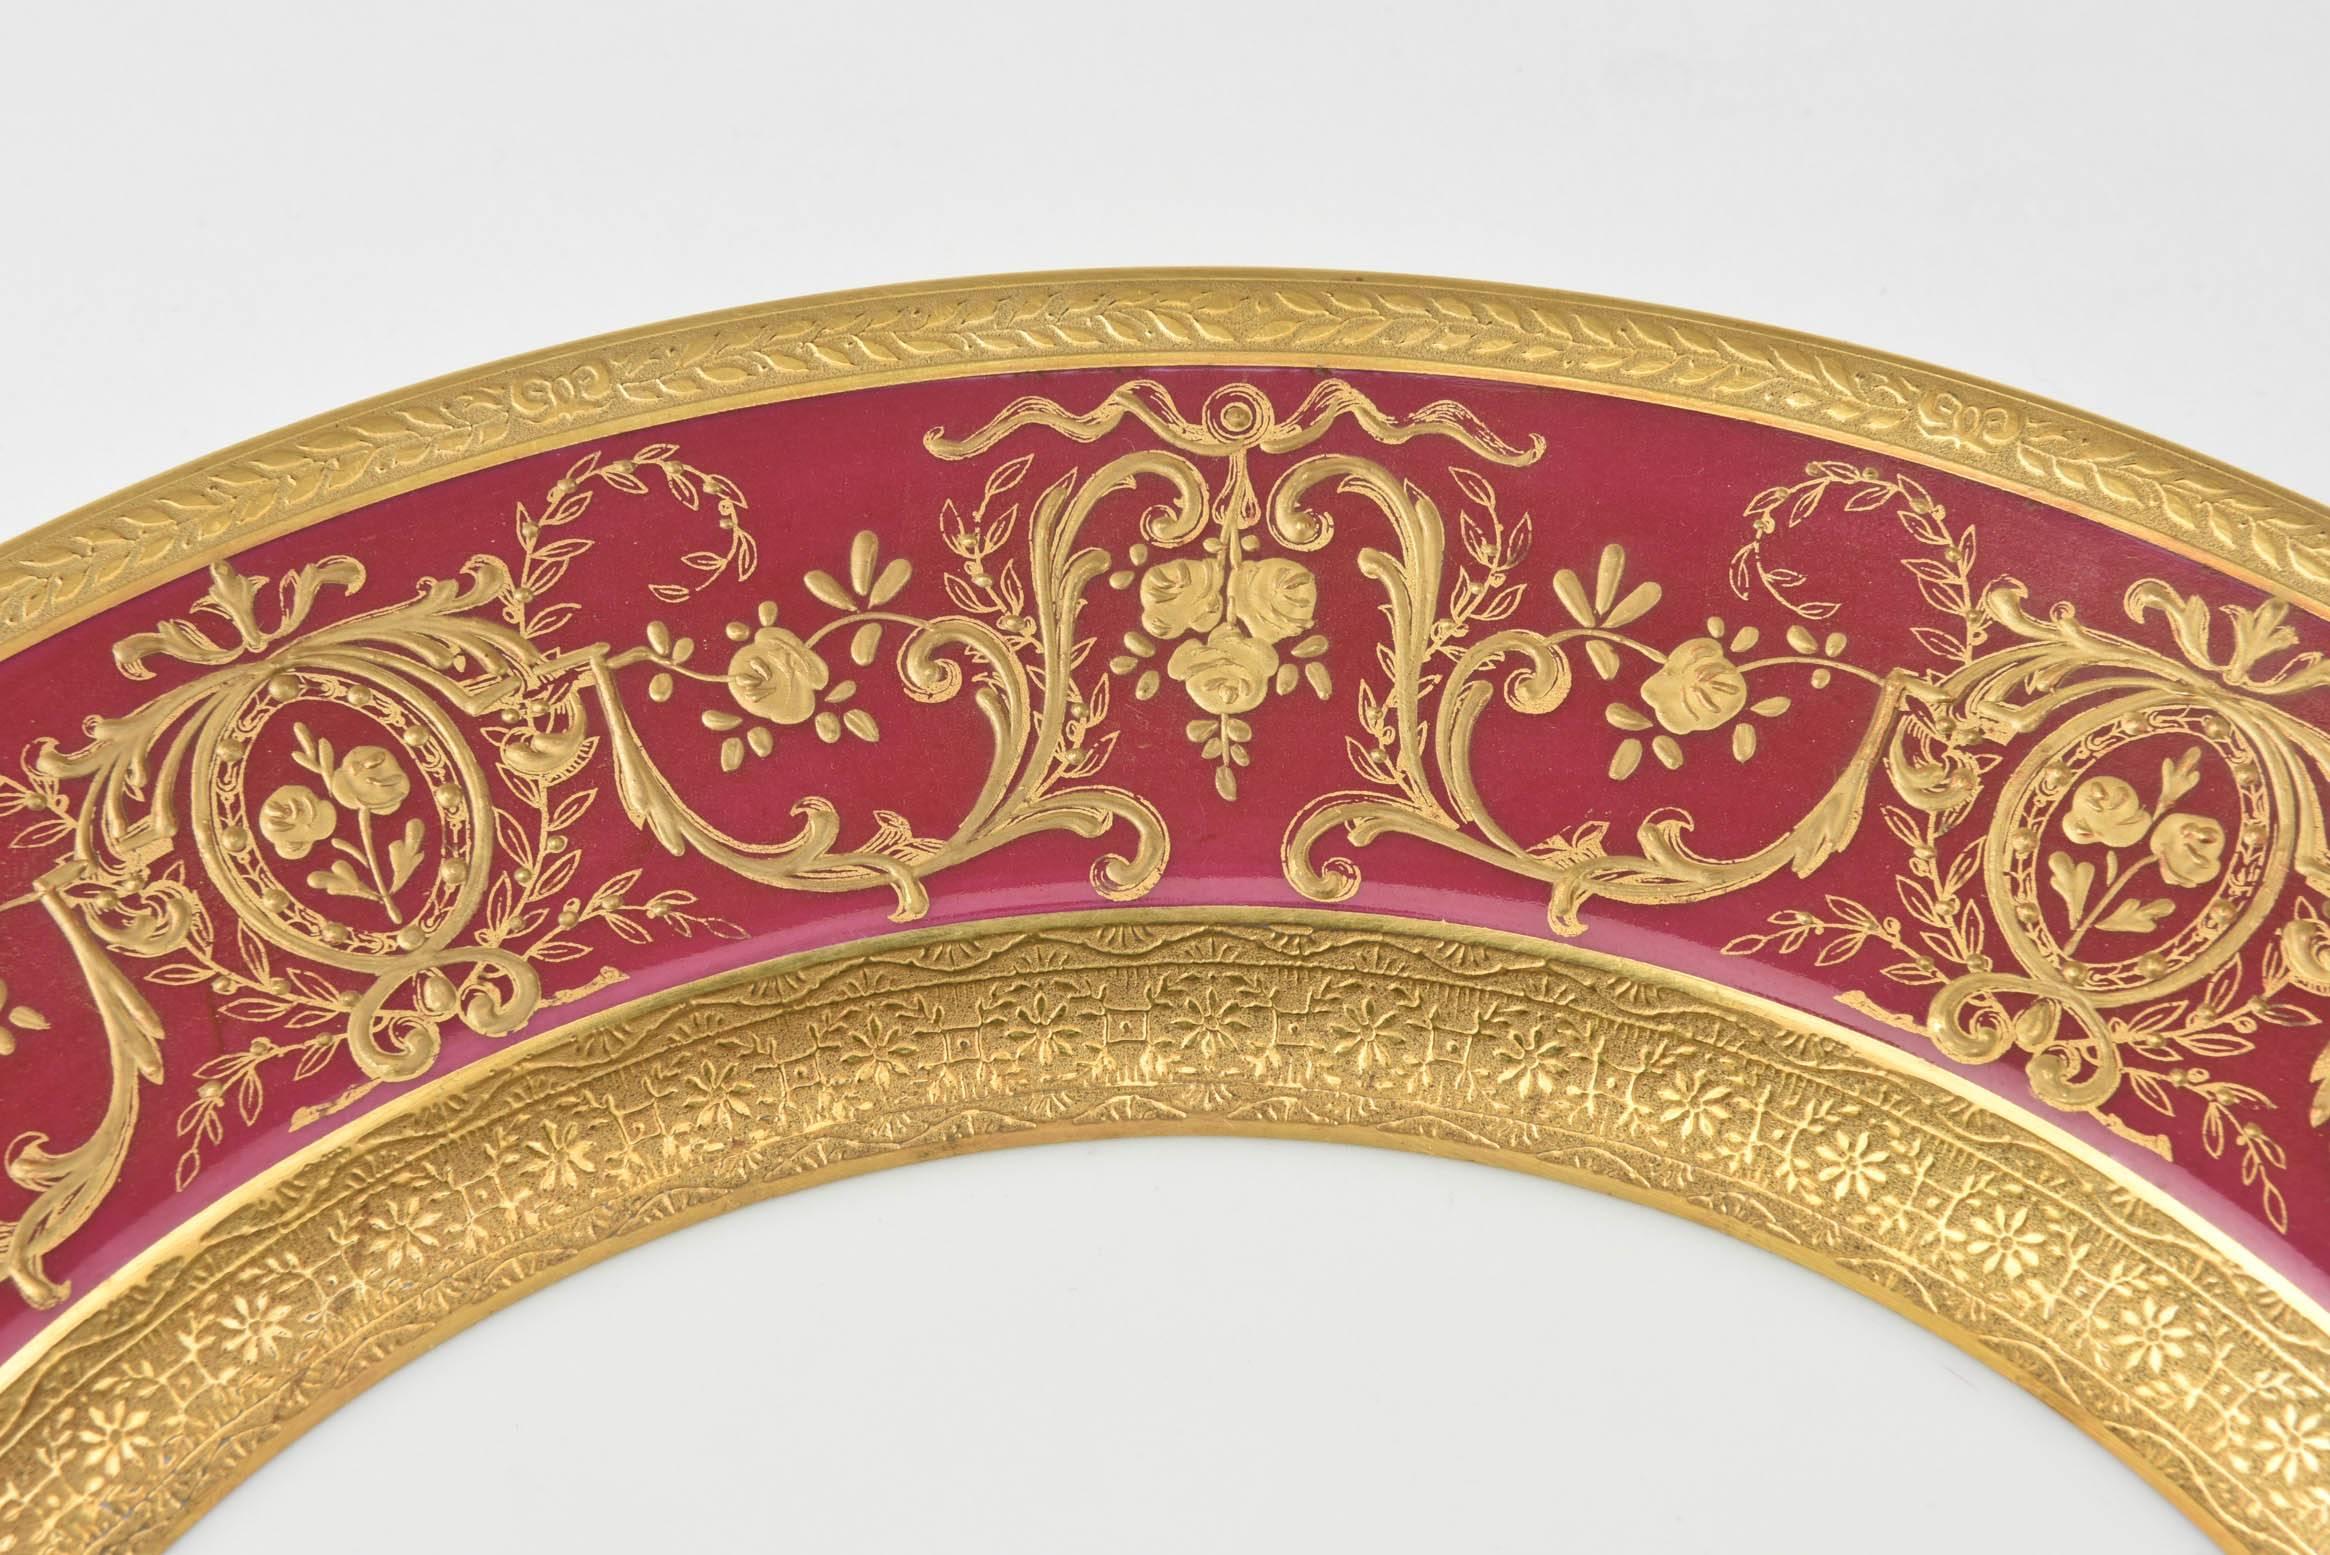 Hand-Crafted Extensive Rare Rich Ruby Gilt Encrusted China Dinner Service, Paris